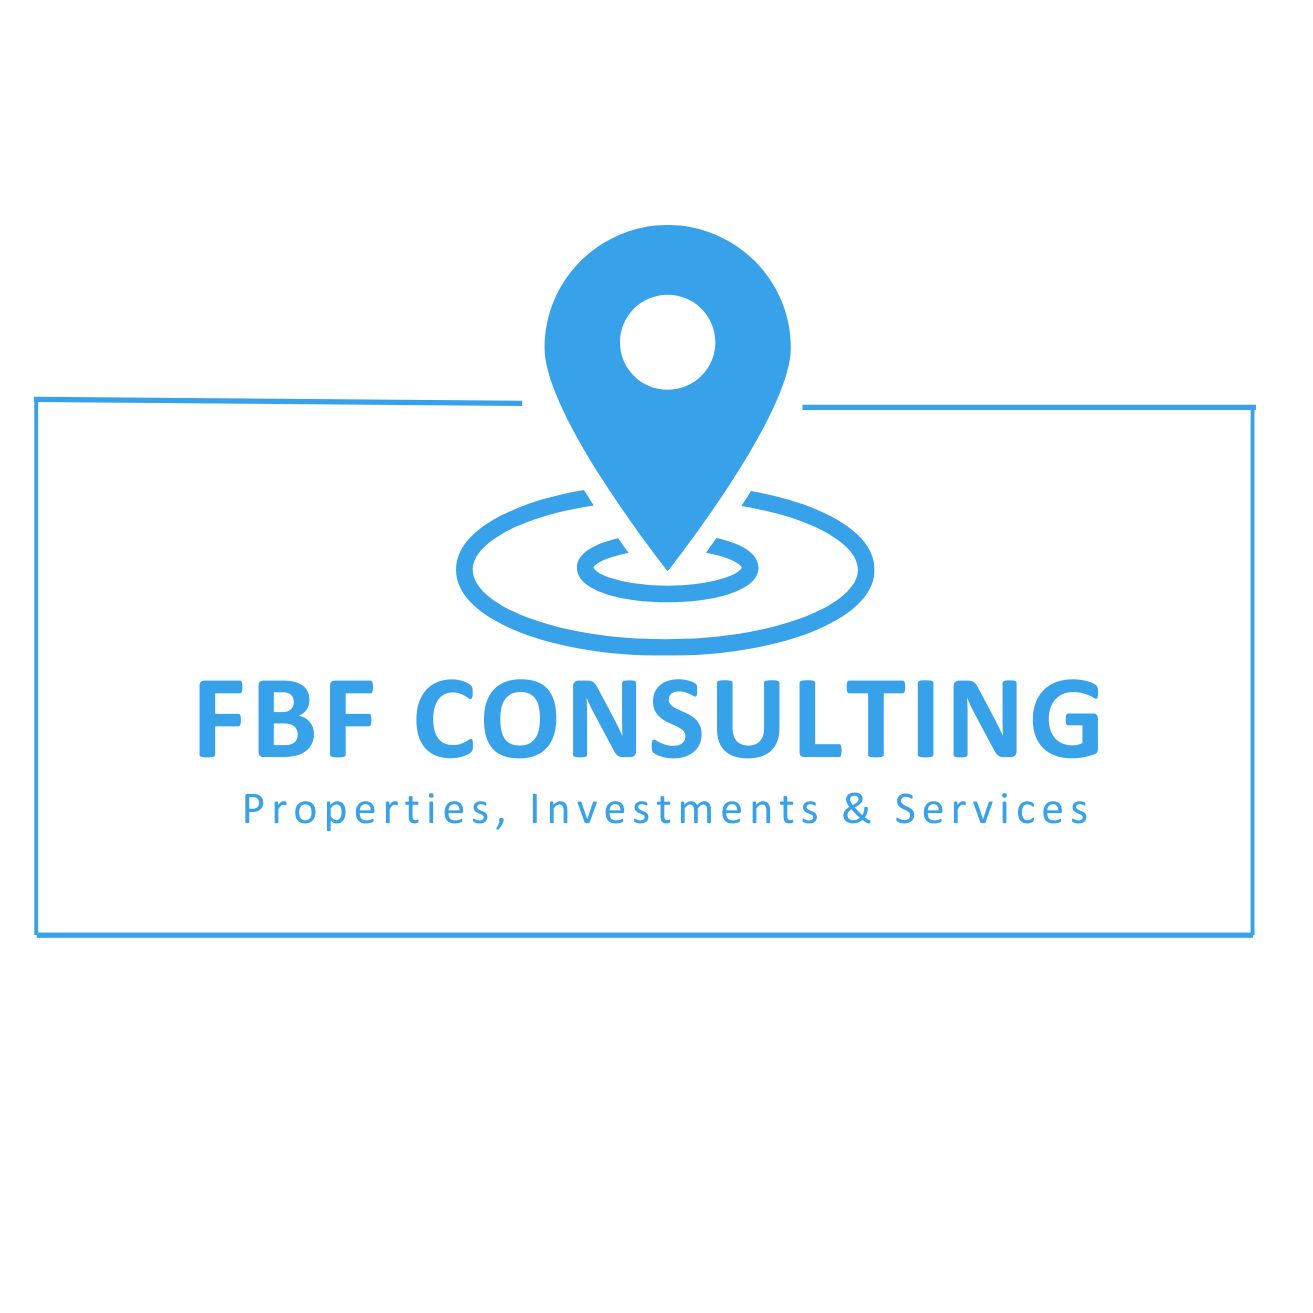 FBF CONSULTING